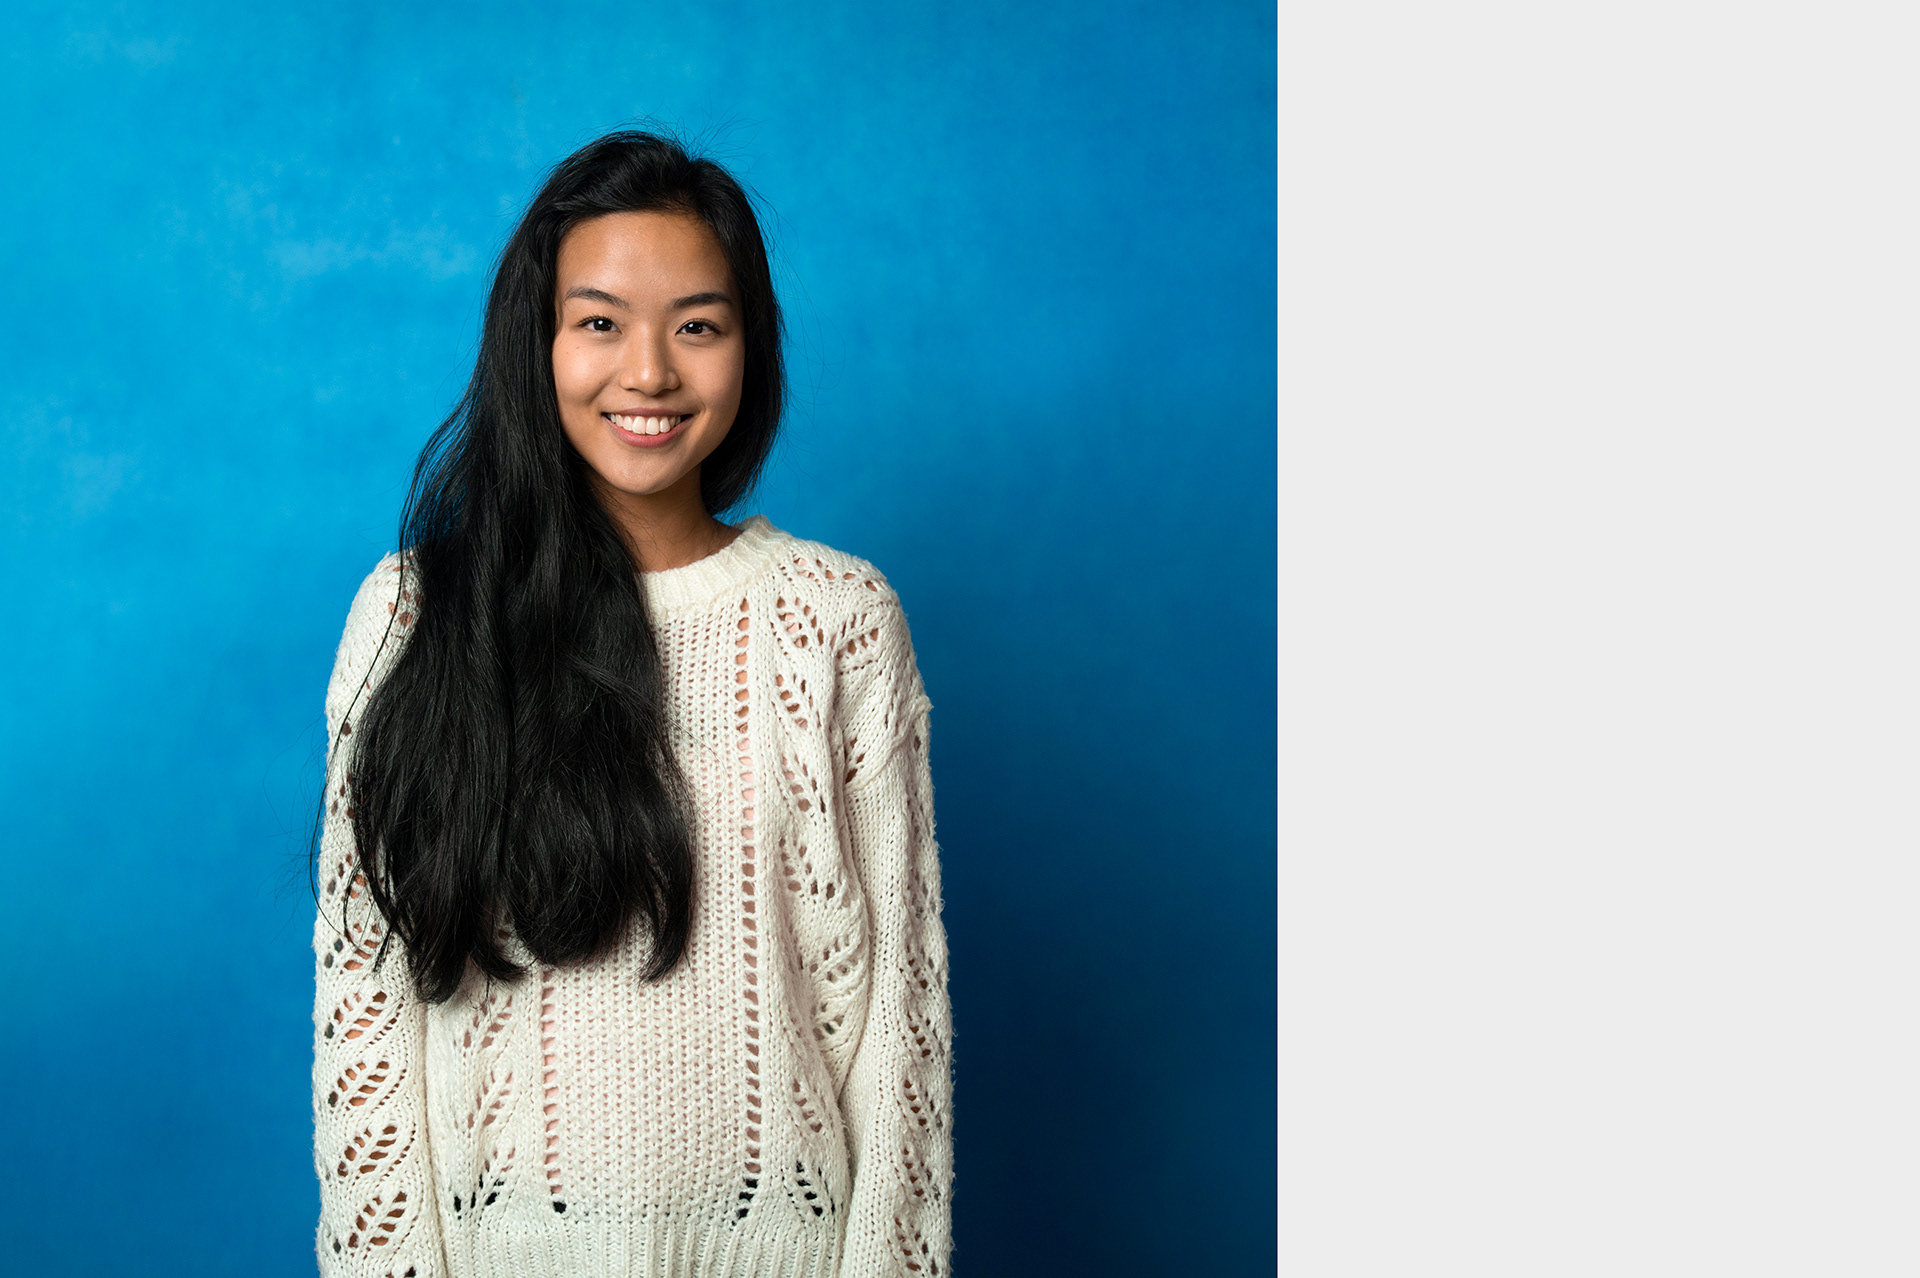 Hoang, studio portrait of young female volunteer in front of blue background